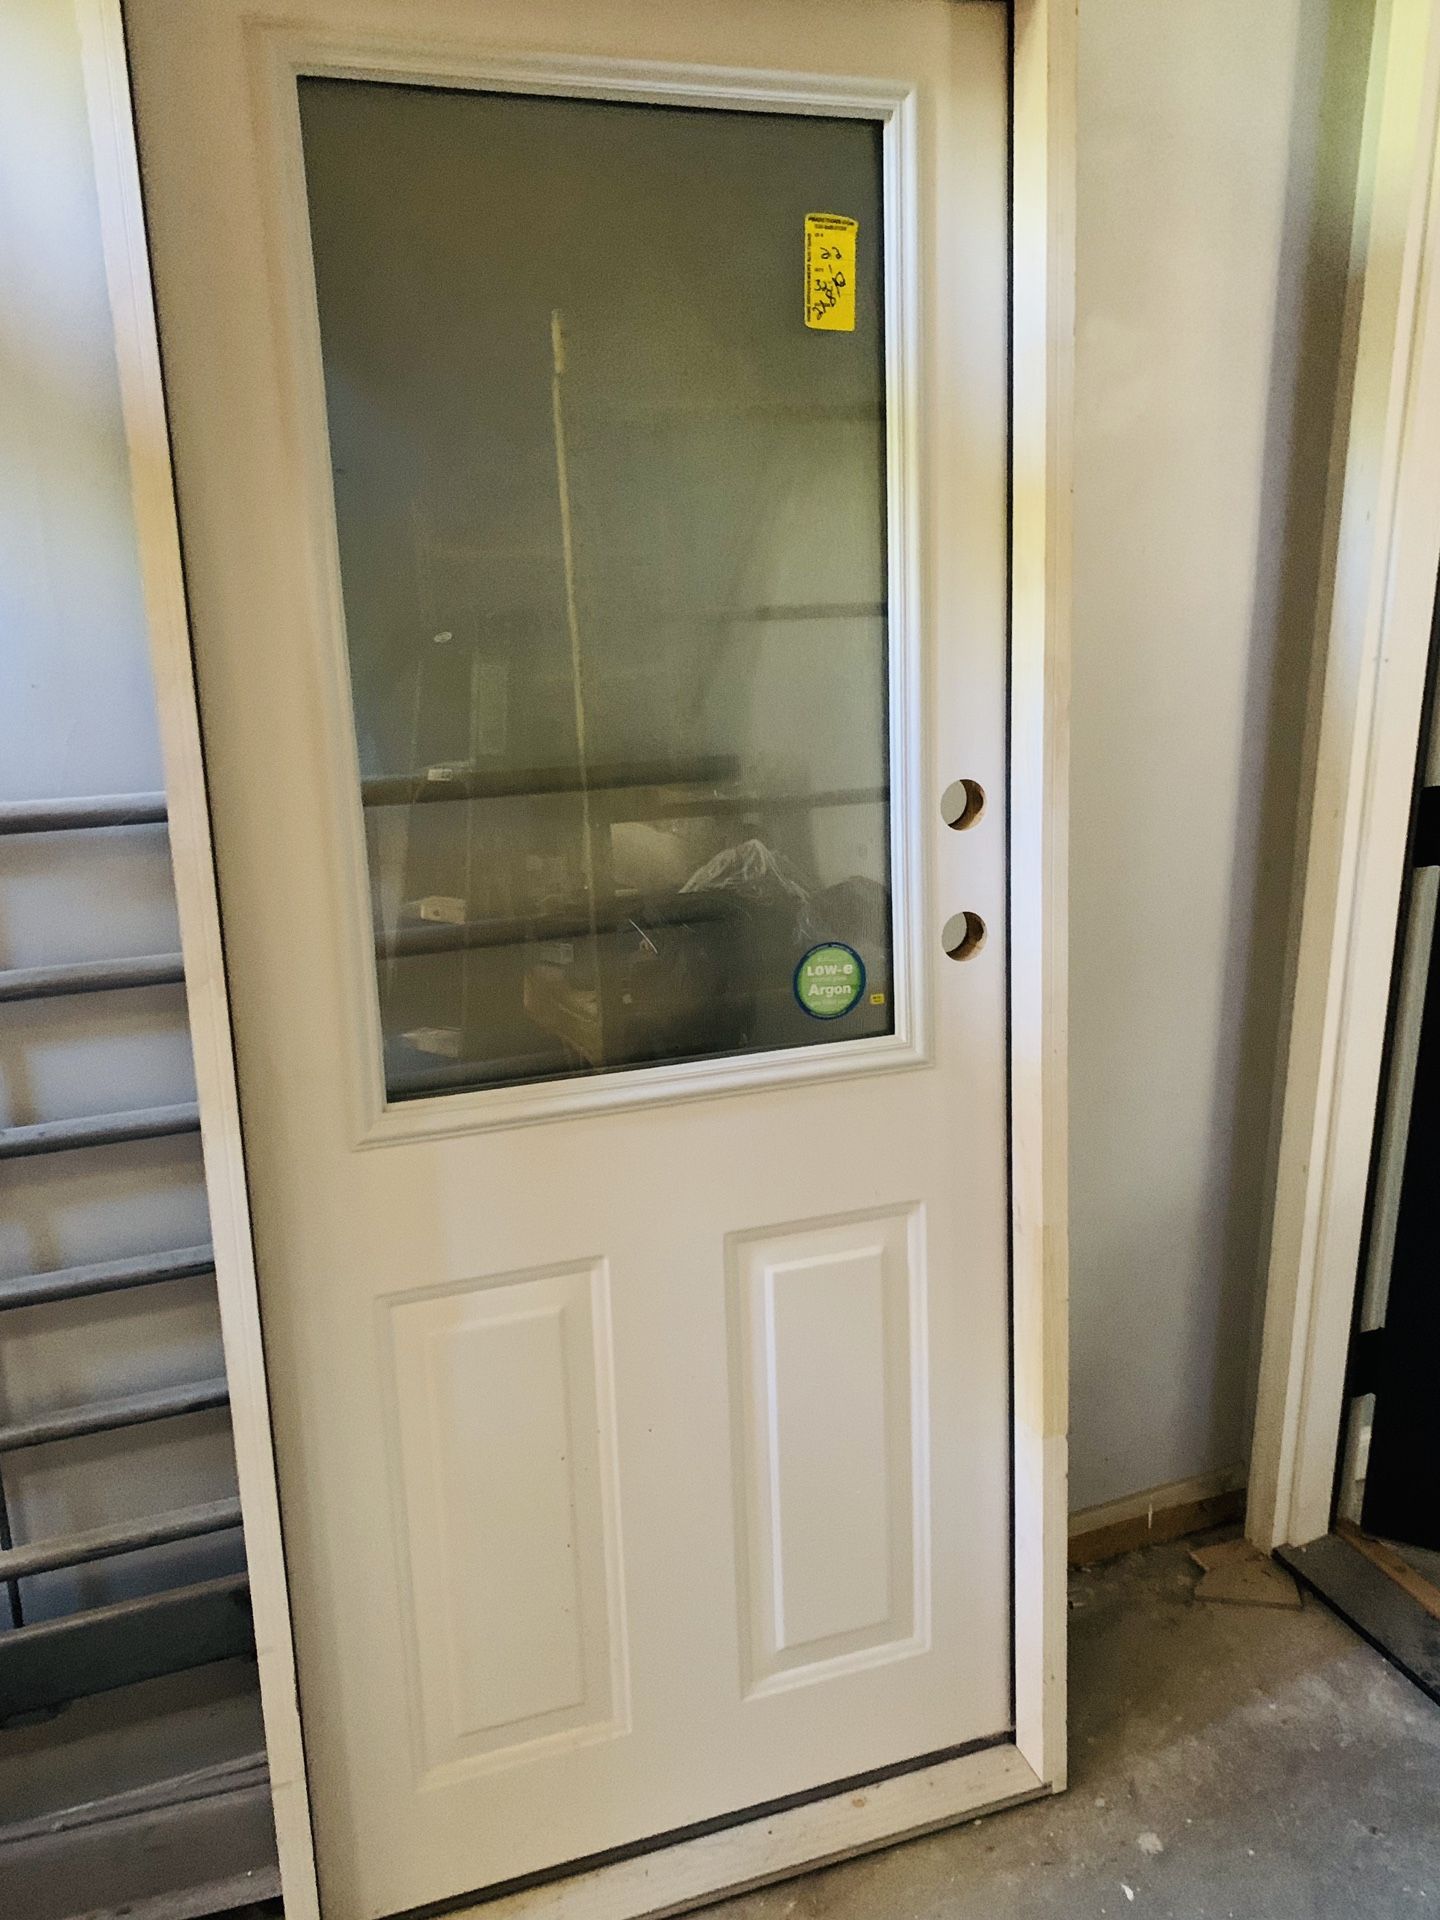 Masonite Low-e Coated glass door and frame